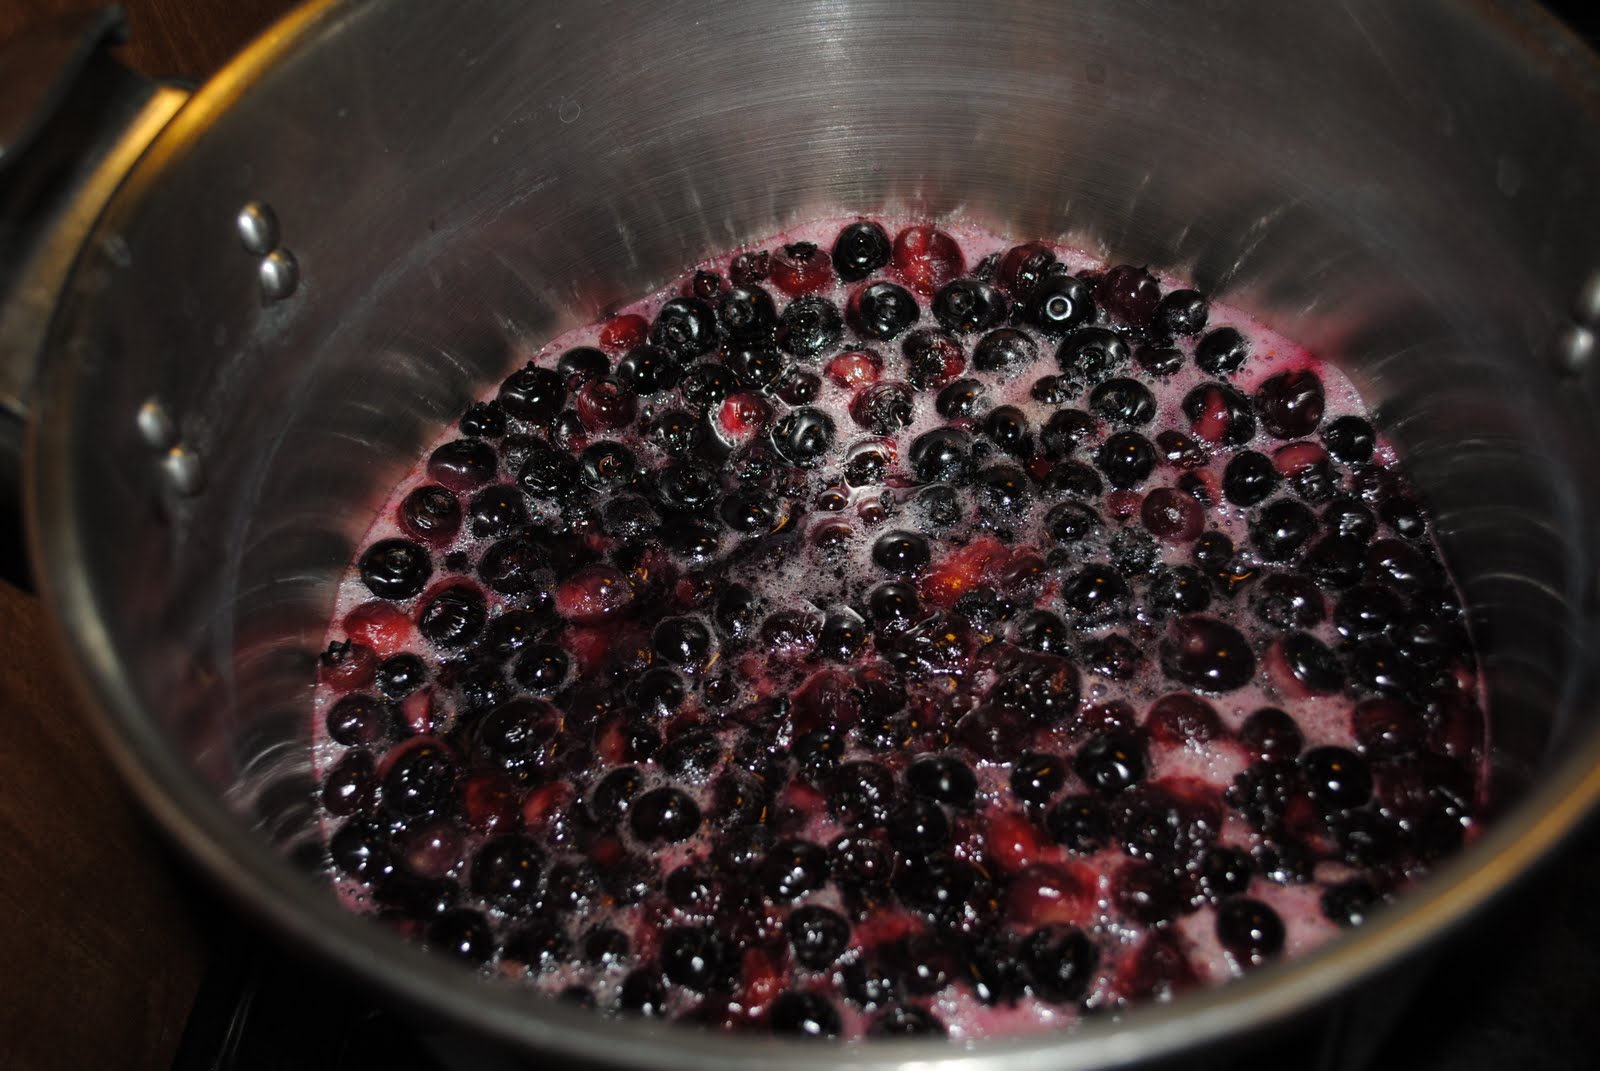 Creative Homesteading: Blueberry Juice Concentrate